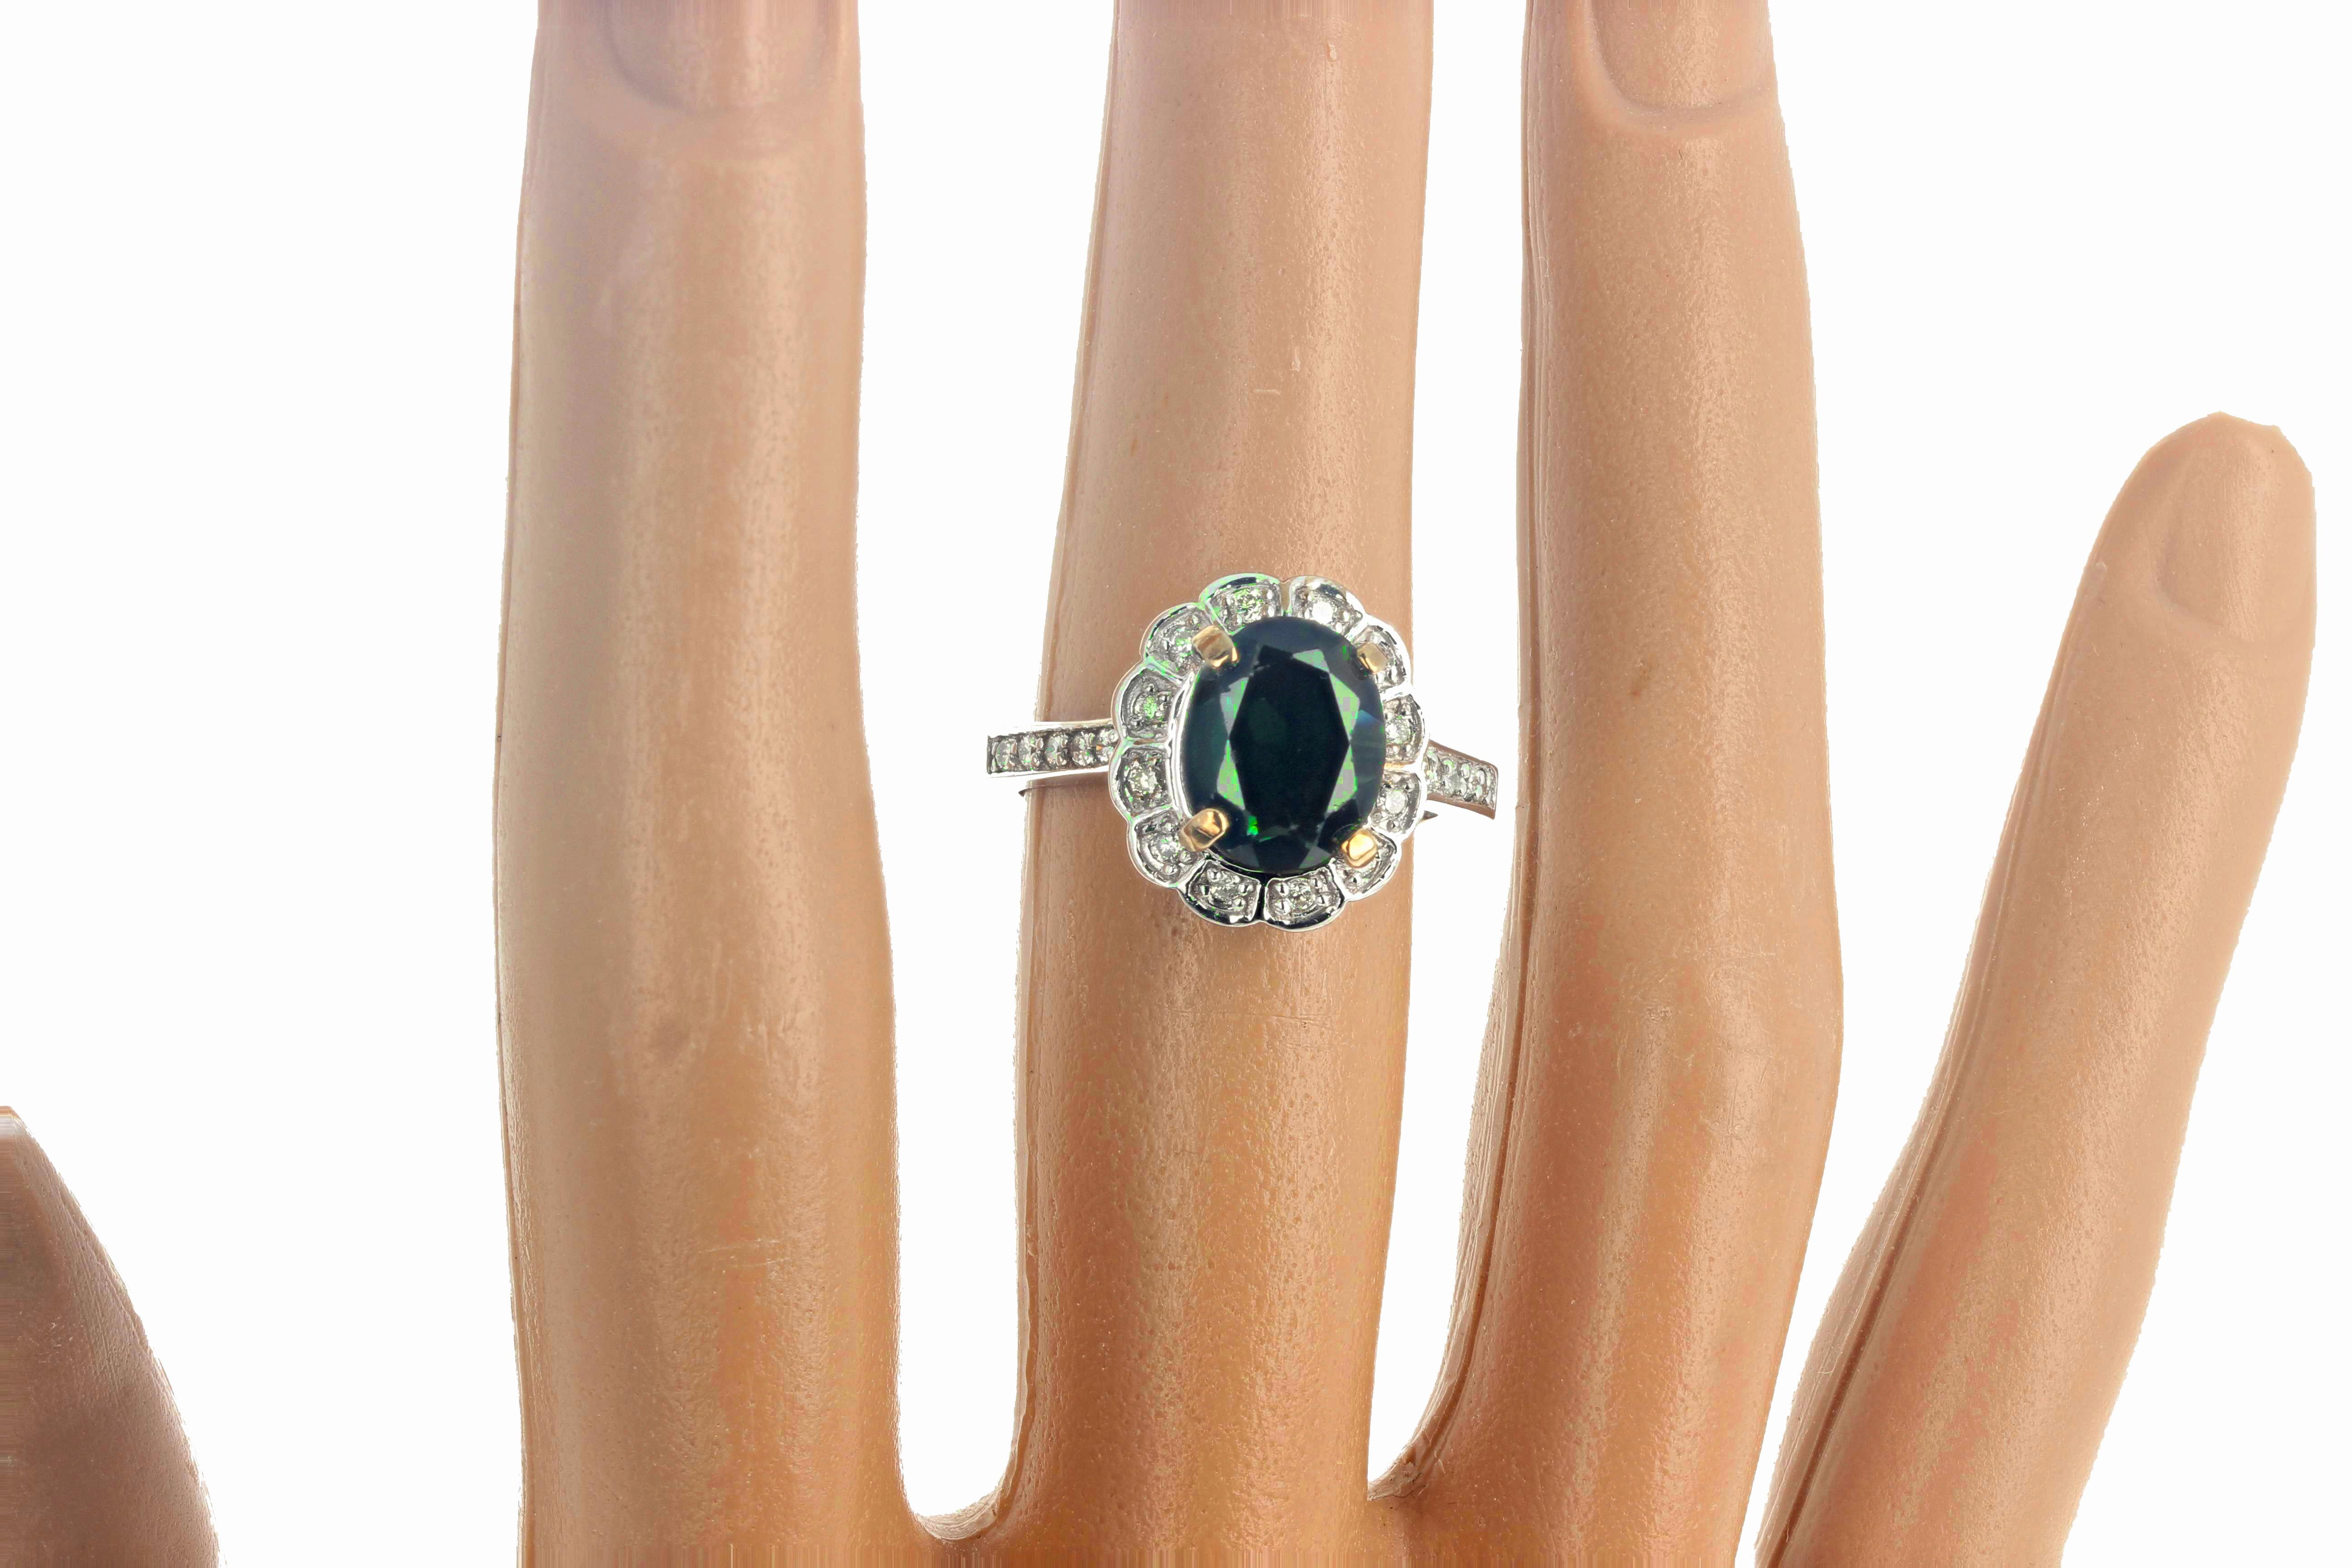 AJD Intensely Glowing 2.23 Ct Green Apatite & White Diamonds Ring For Sale 7